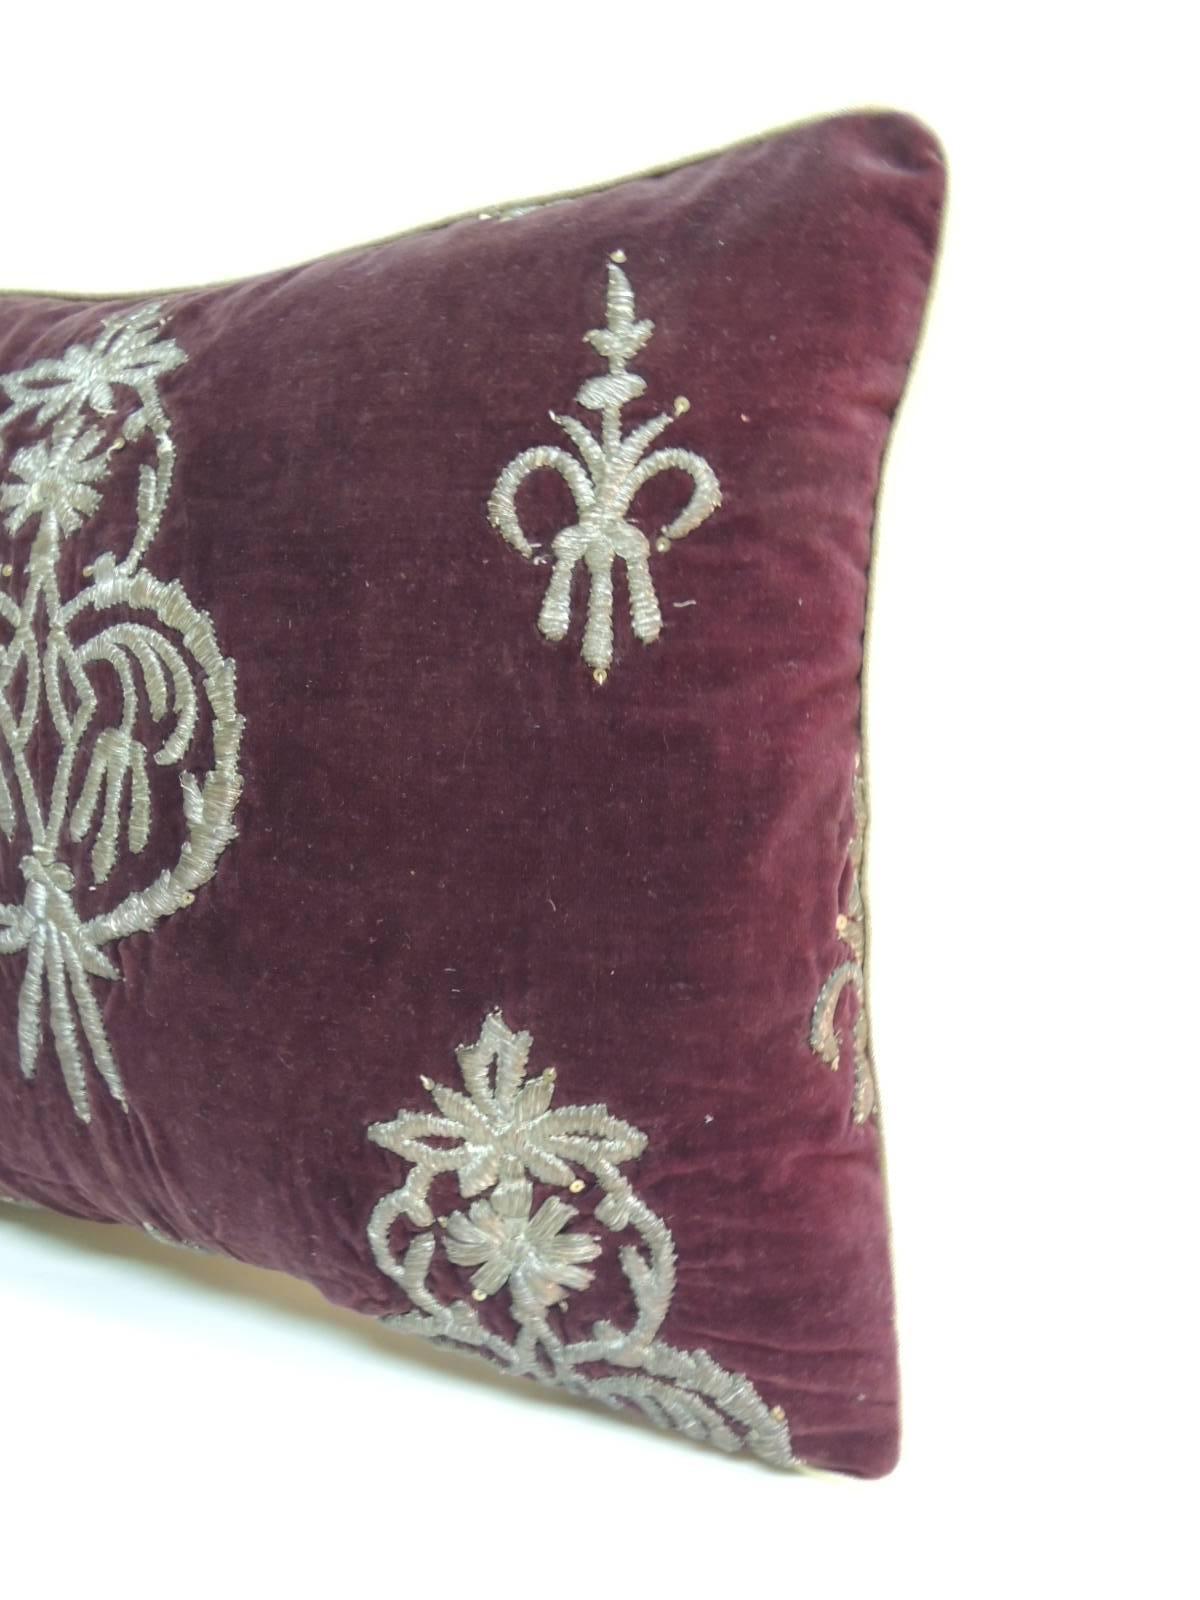 18th century Persian metallic threads embroidered throw pillow. Handcrafted accent pillow with metallic silver color threads embroidered onto a brown silk velvet with custom silk gold piping same as backing
One-of-a-kind 18th century textile